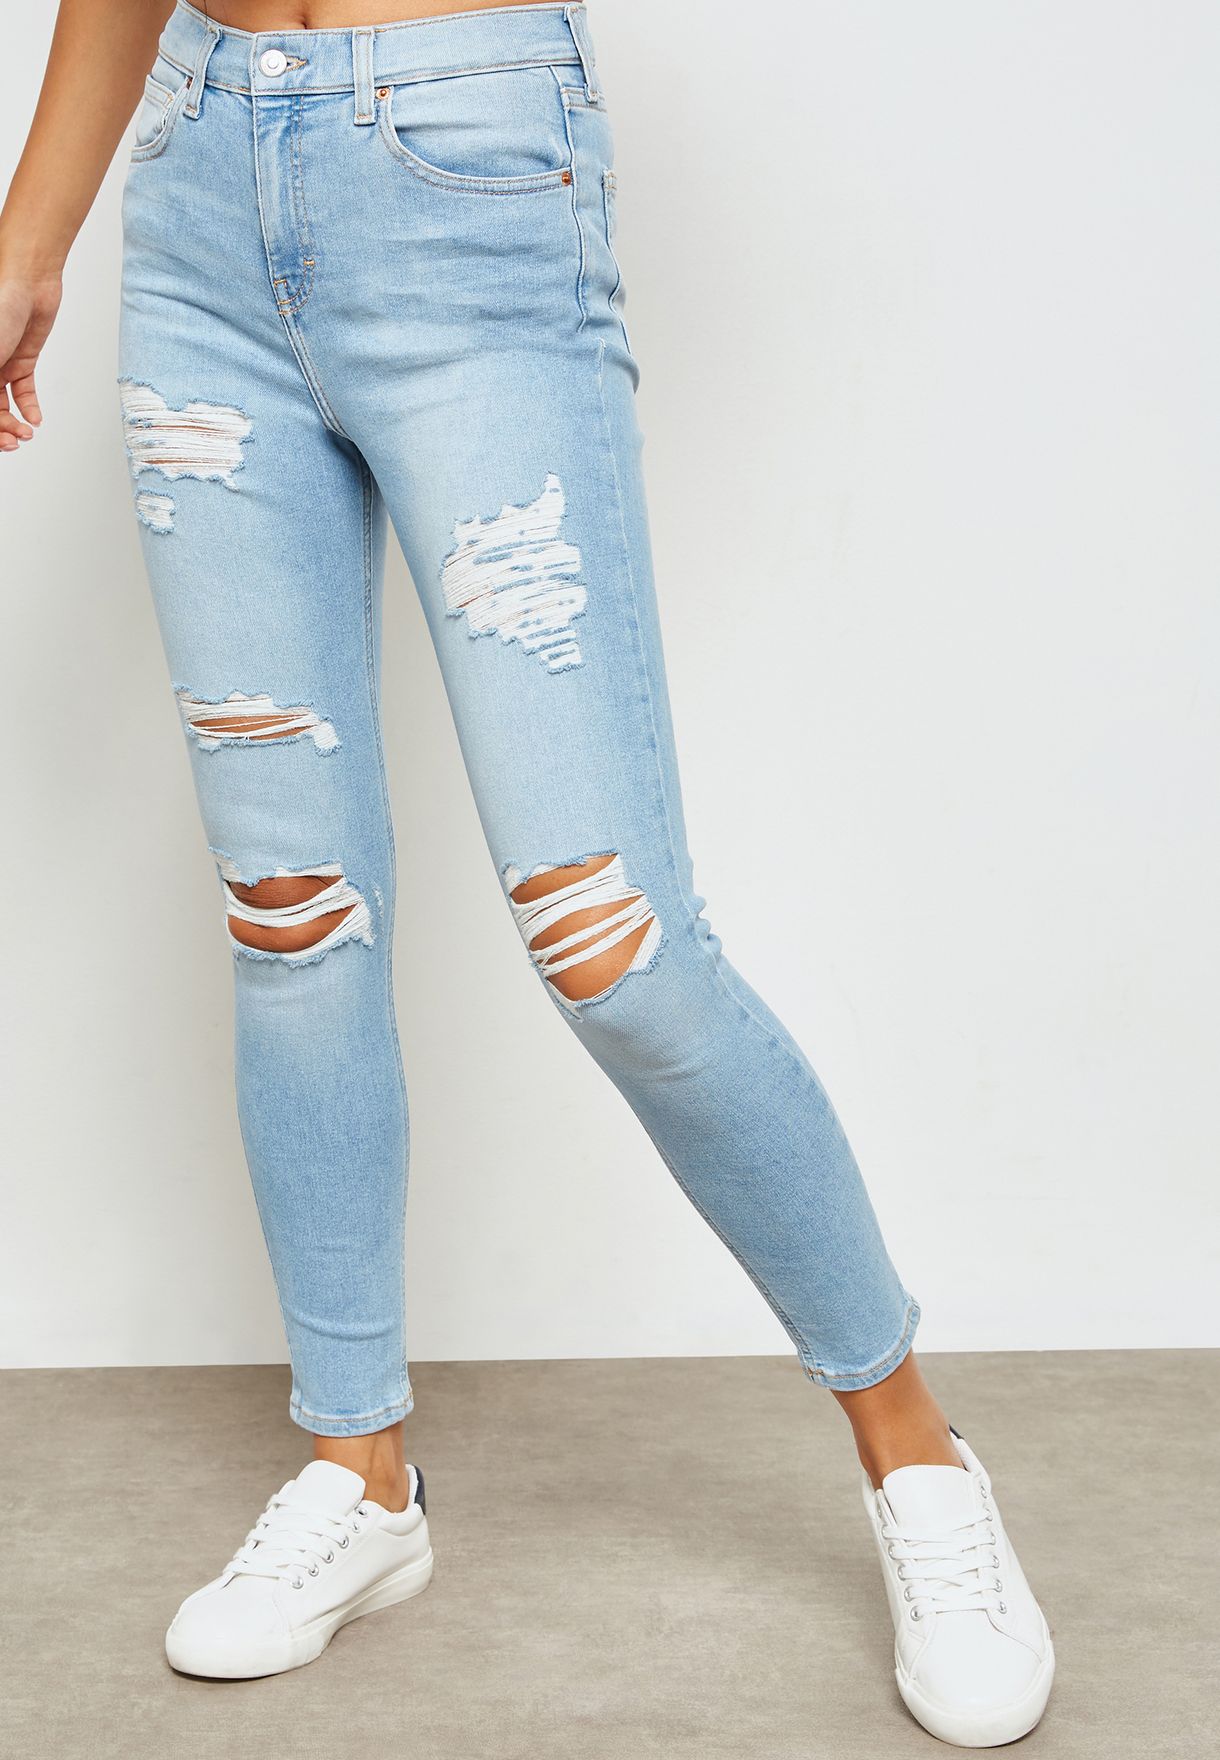 topshop mid blue super ripped jamie jeans